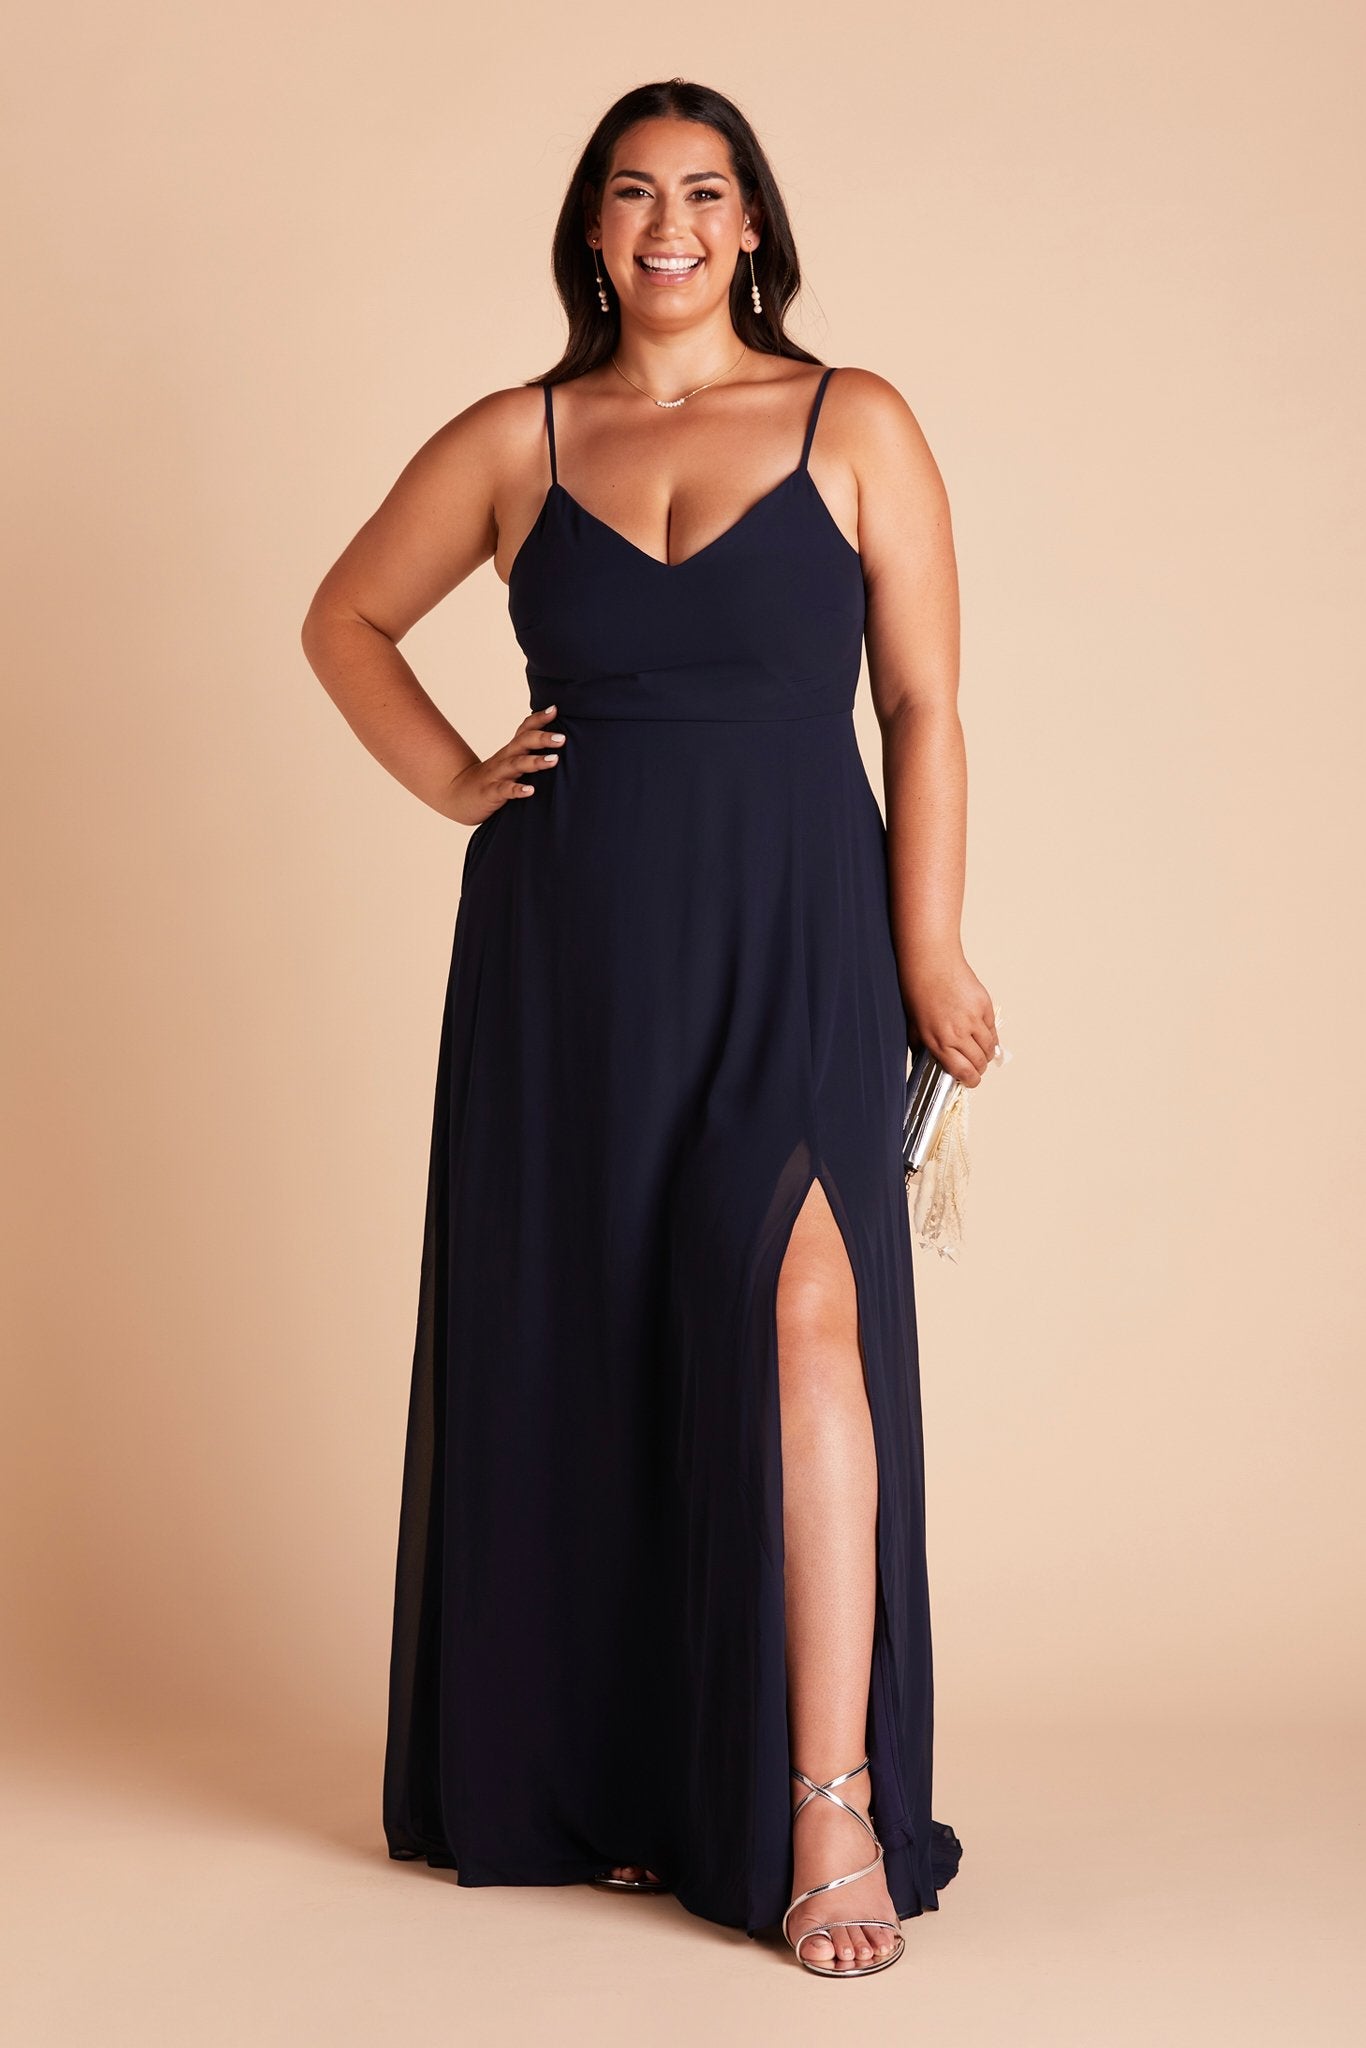 Devin convertible plus size bridesmaids dress with slit  in navy blue chiffon by Birdy Grey, front view